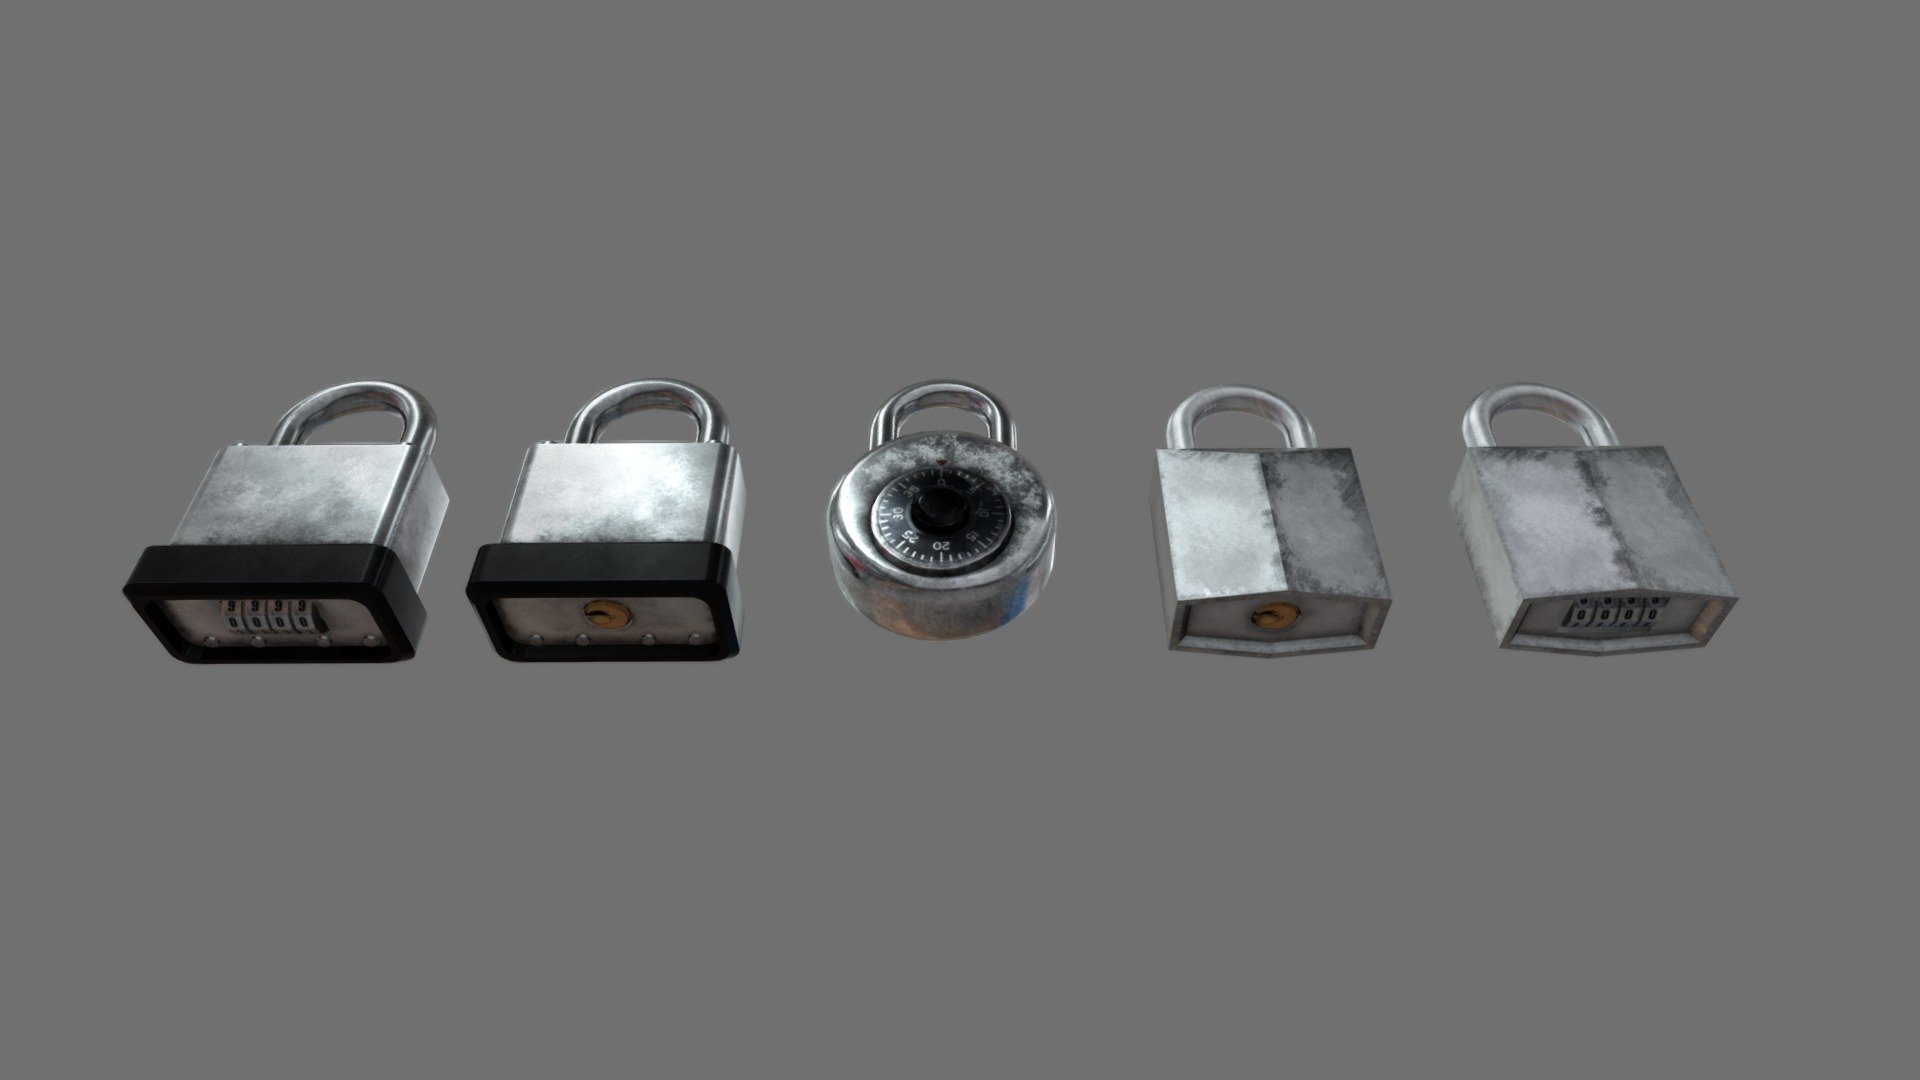 Need a Lock? Well, have 5 of them!

Welcome to my Lock Collection! THESE LOCKS ARE ALL RIGGED AND ARE GAME READY!

There are a total of 10 textures and 5 locks that are all rigged. 

Every Lock has been exported as .fbx files with specific names for importing and easy finding.

Inside the Zip file, thats included, contains the original .blend file, 10 textures, and 5 fbx files of the locks 3d model